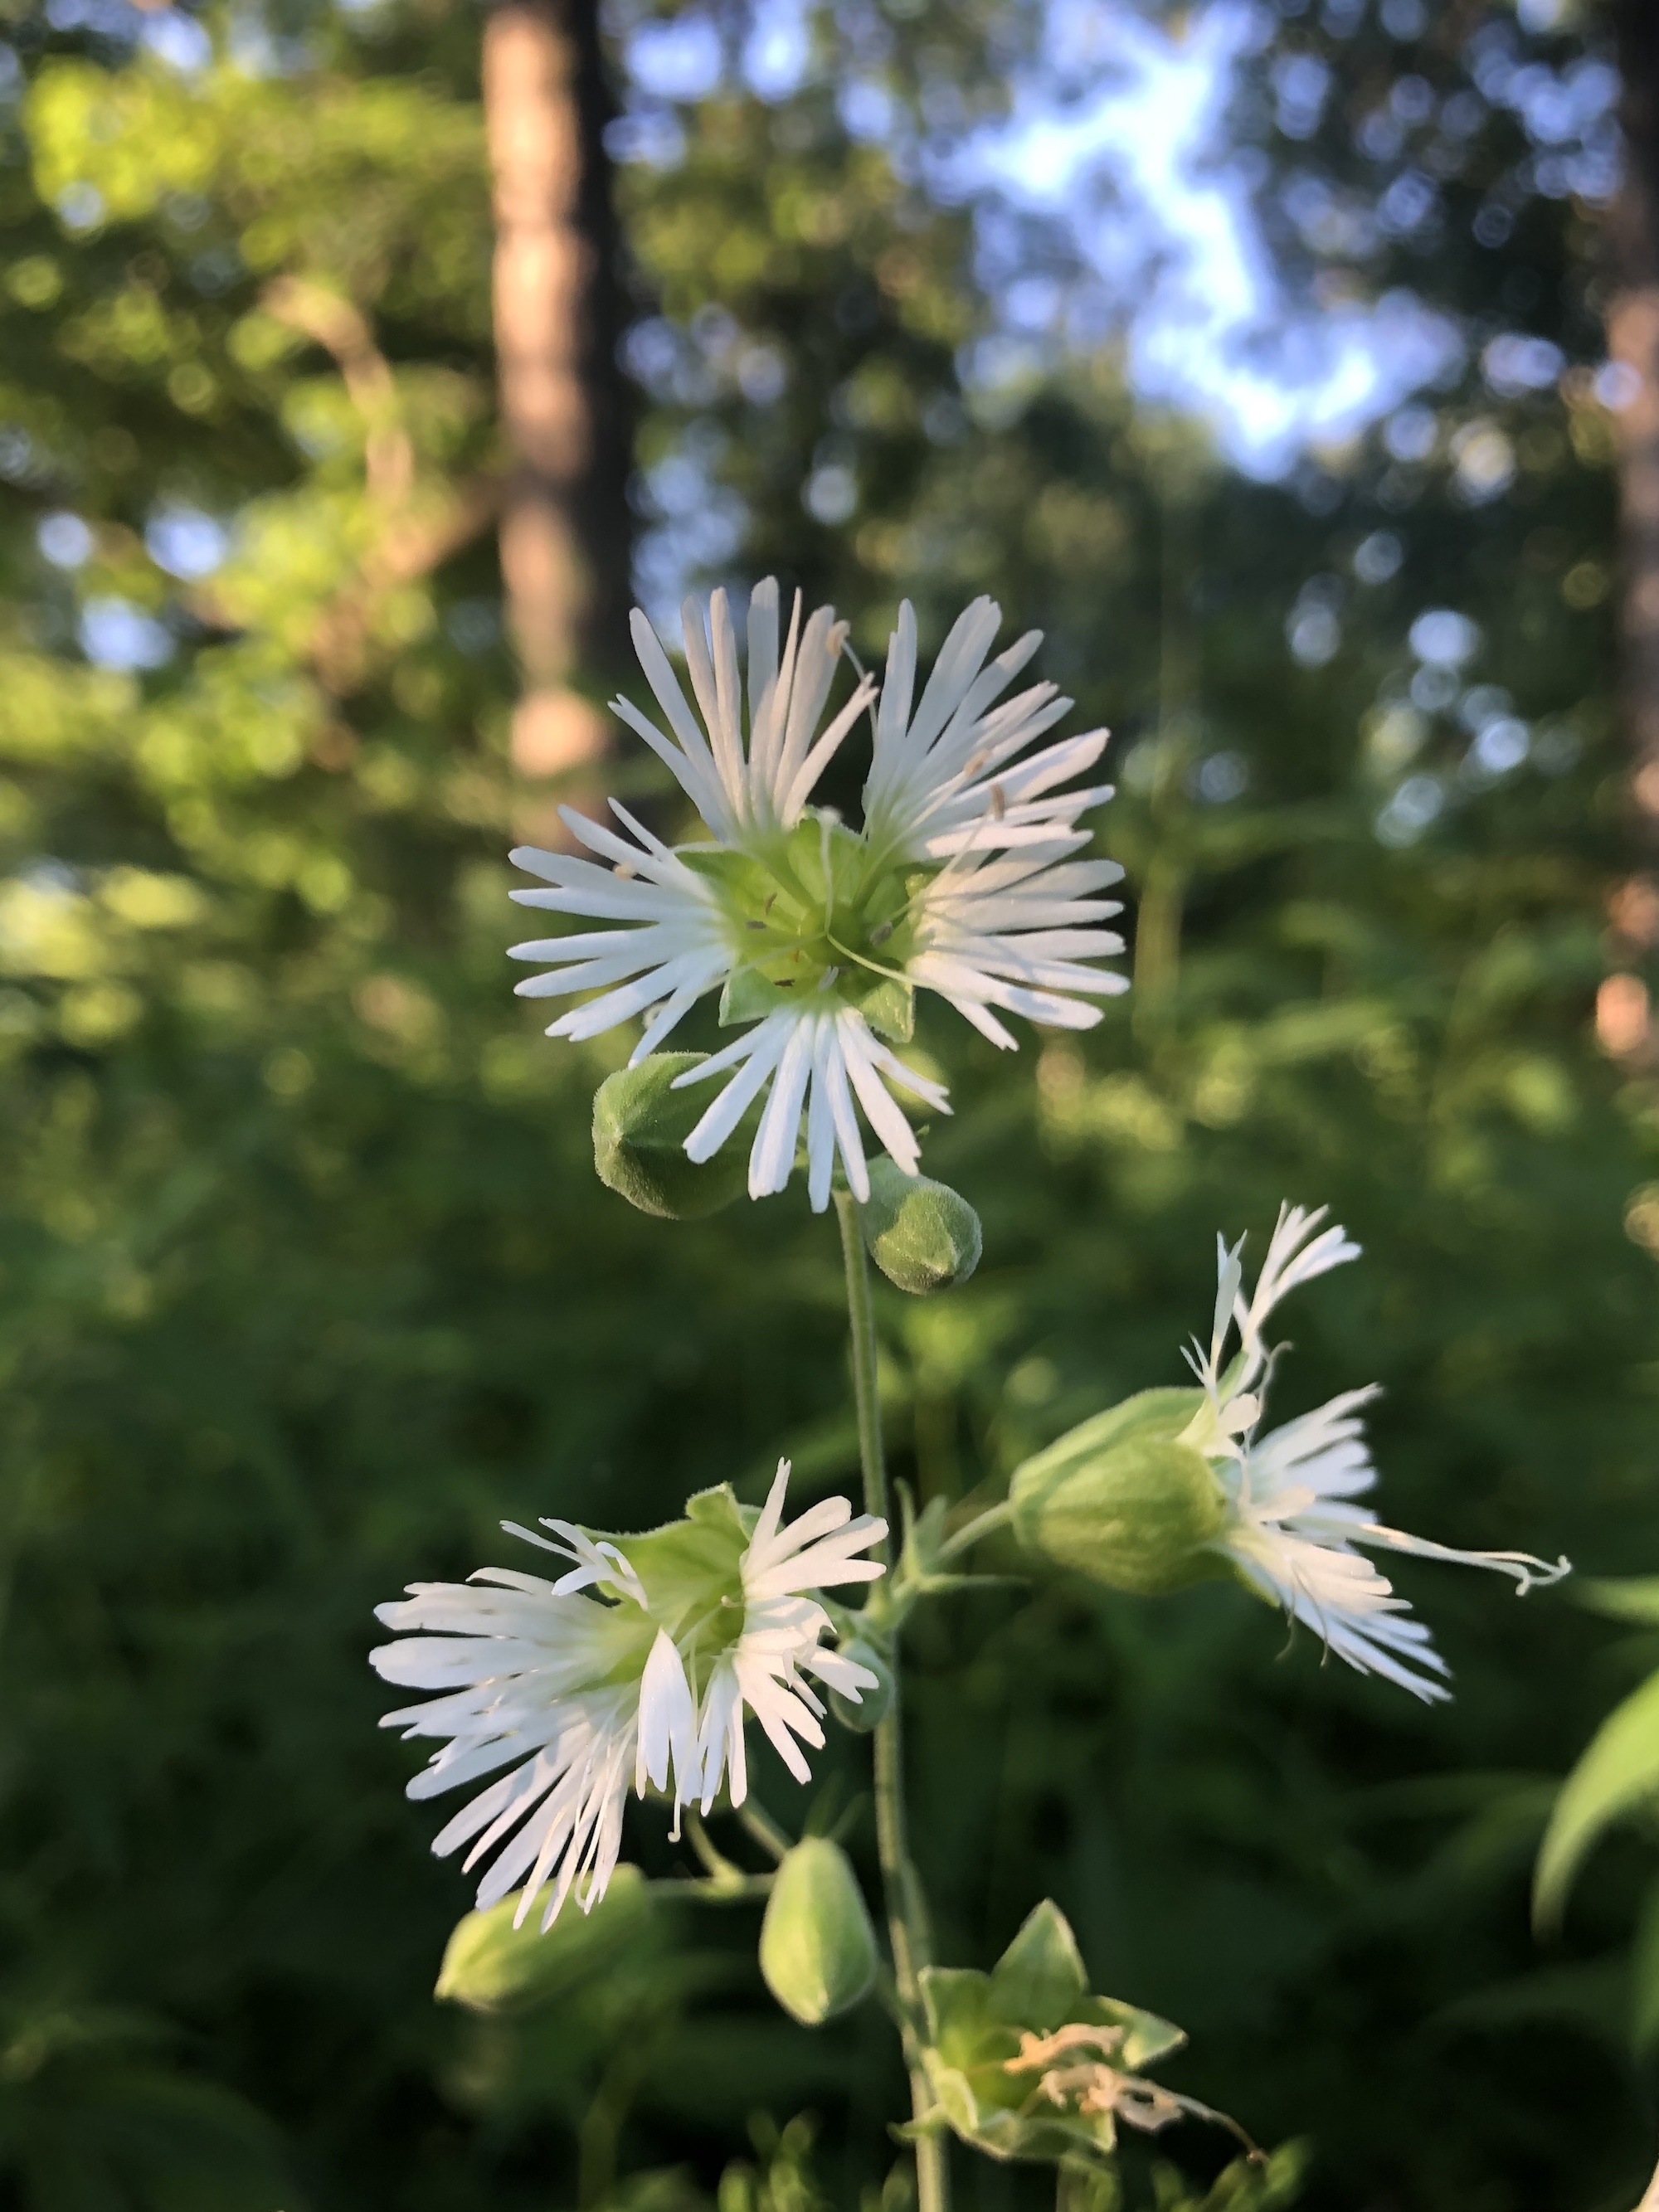 Starry Campion in Nakoma Park on July 17, 2020 in Madison, Wisconsin.